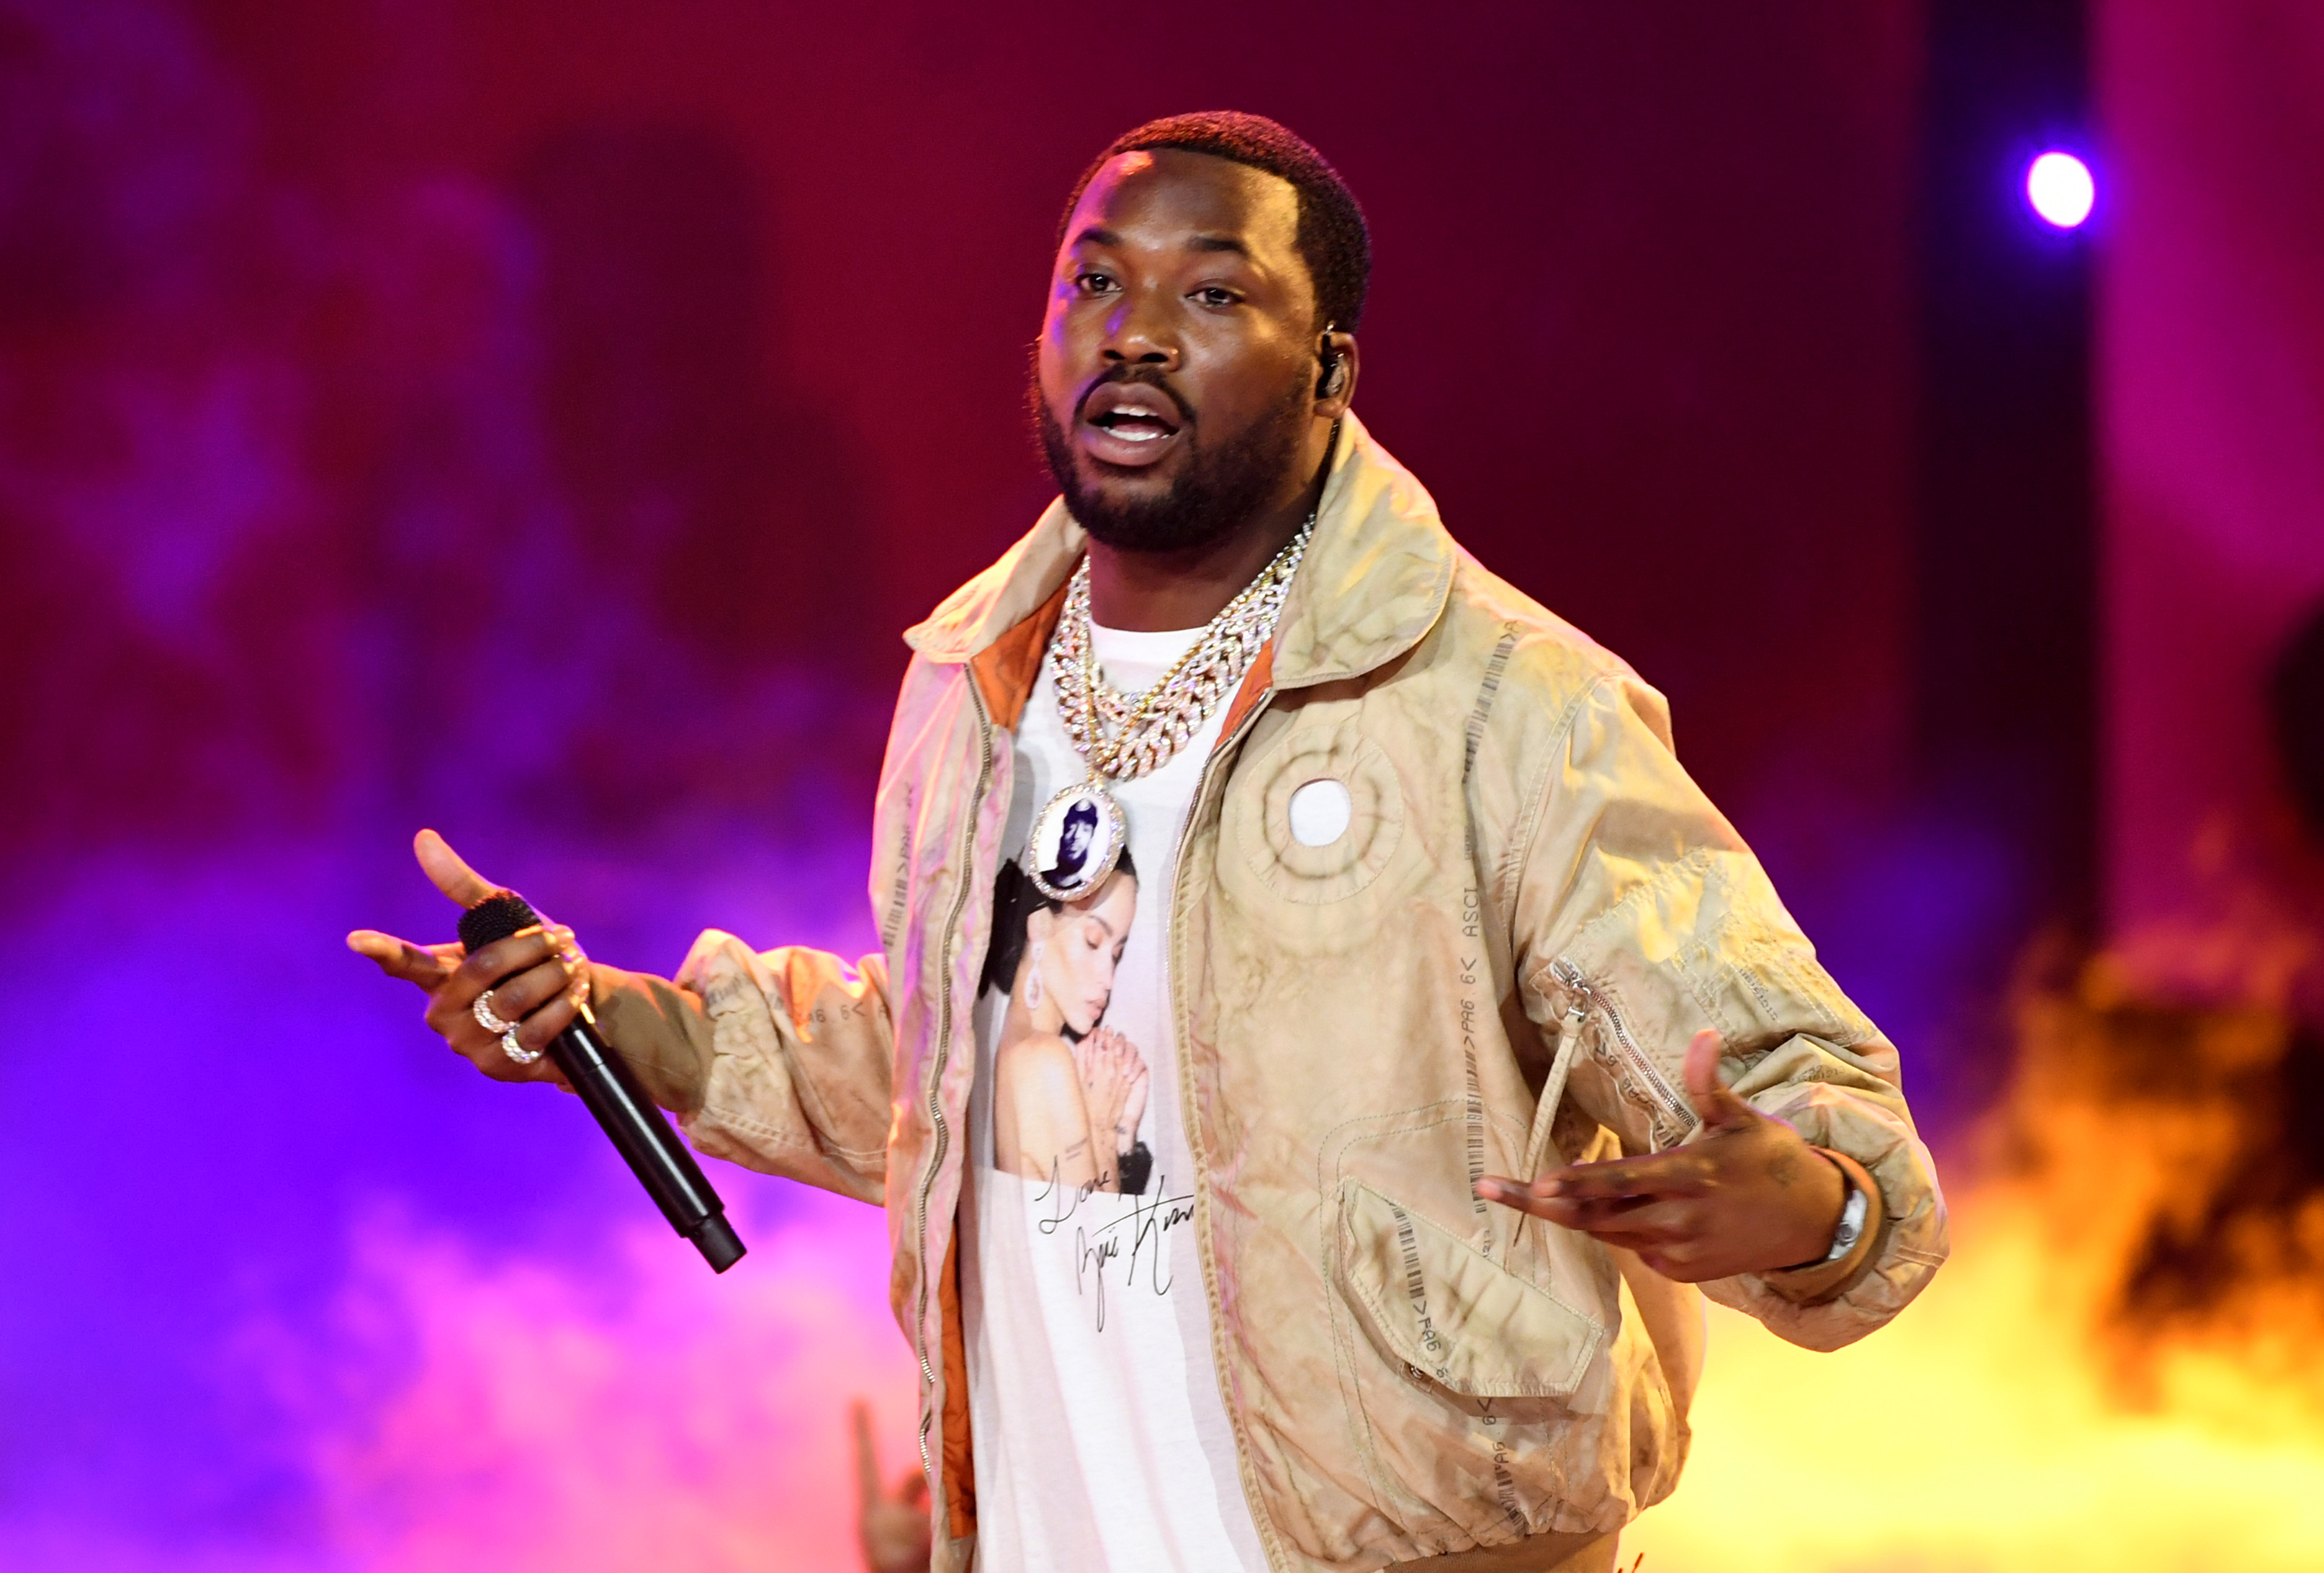 Meek Mill announces his clothing line will be coming soon